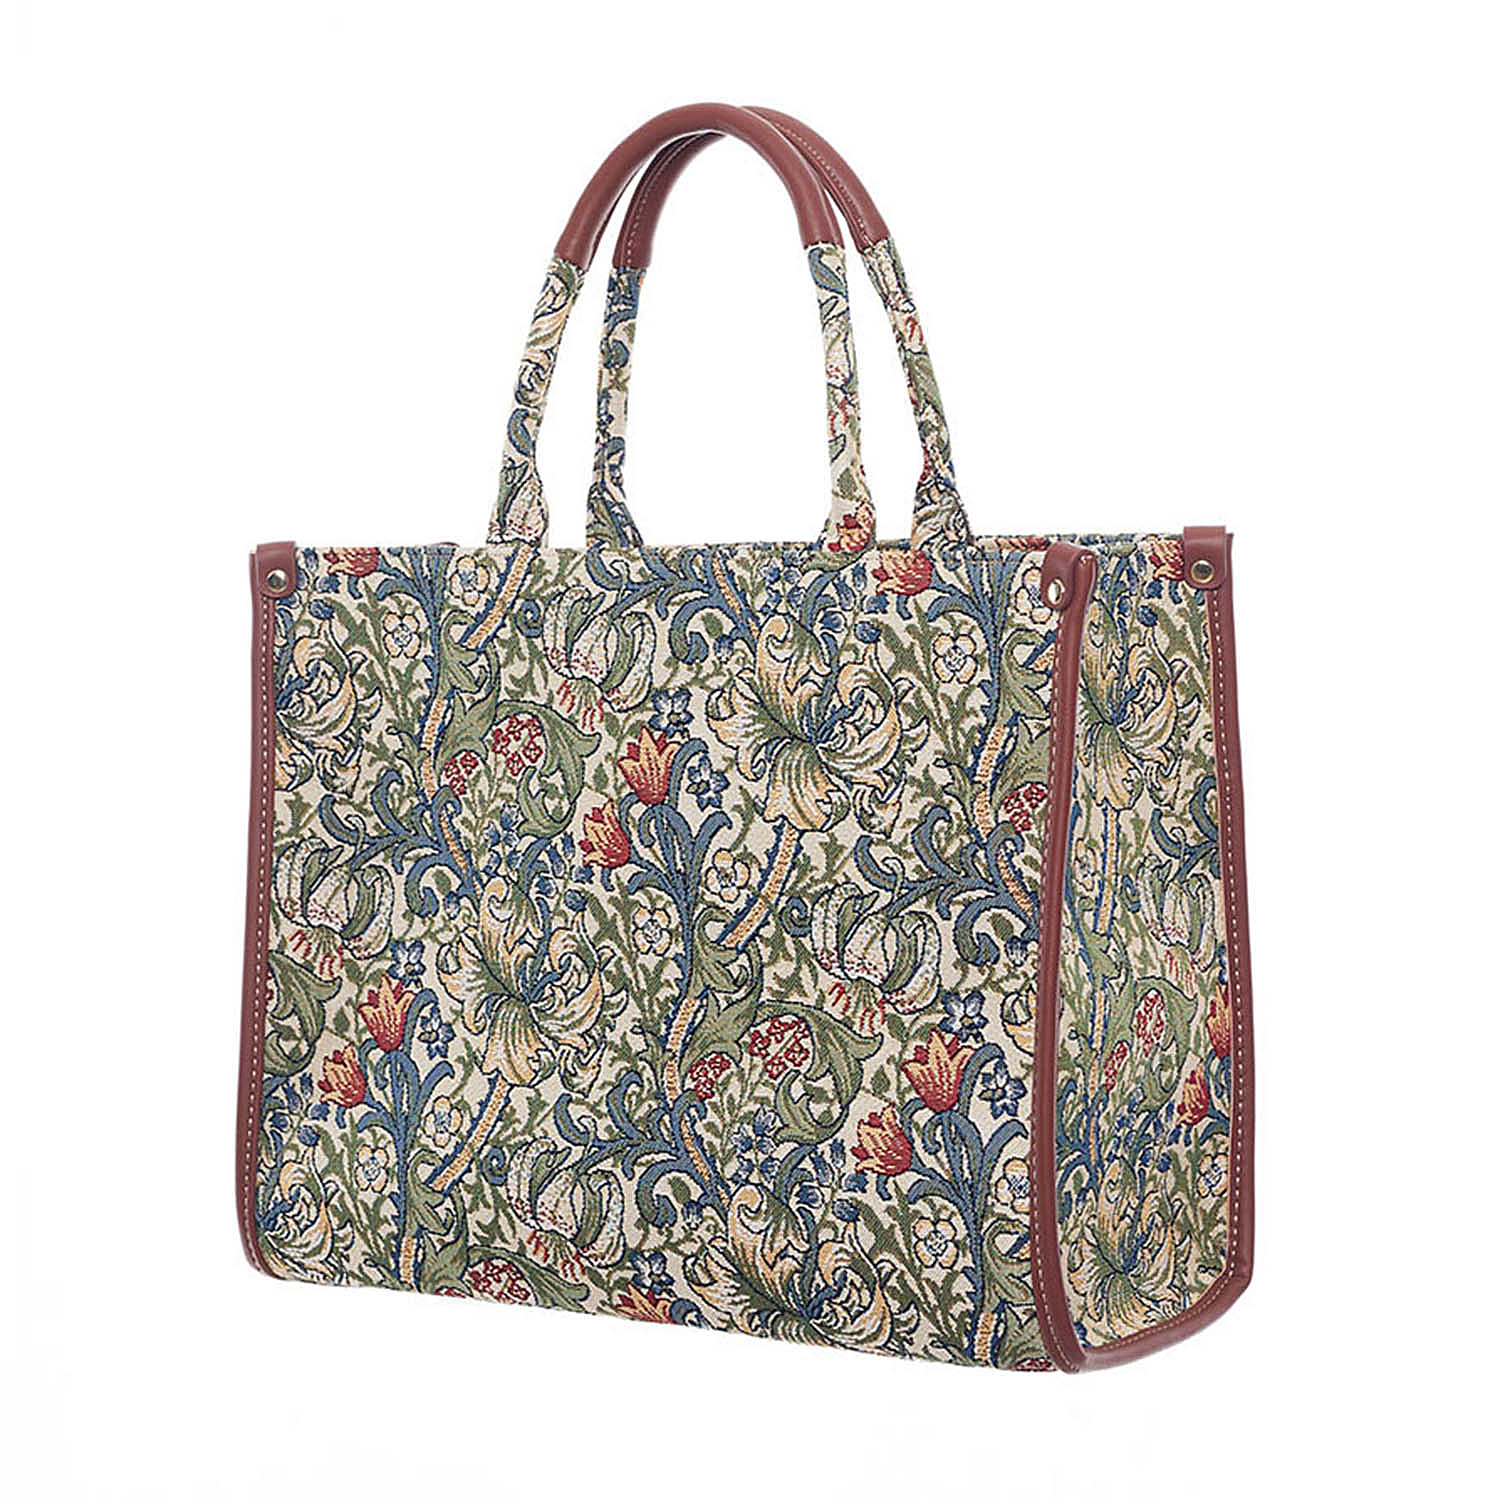 Signare Tapestry Leatherette Golden Lily City Bag - Multi